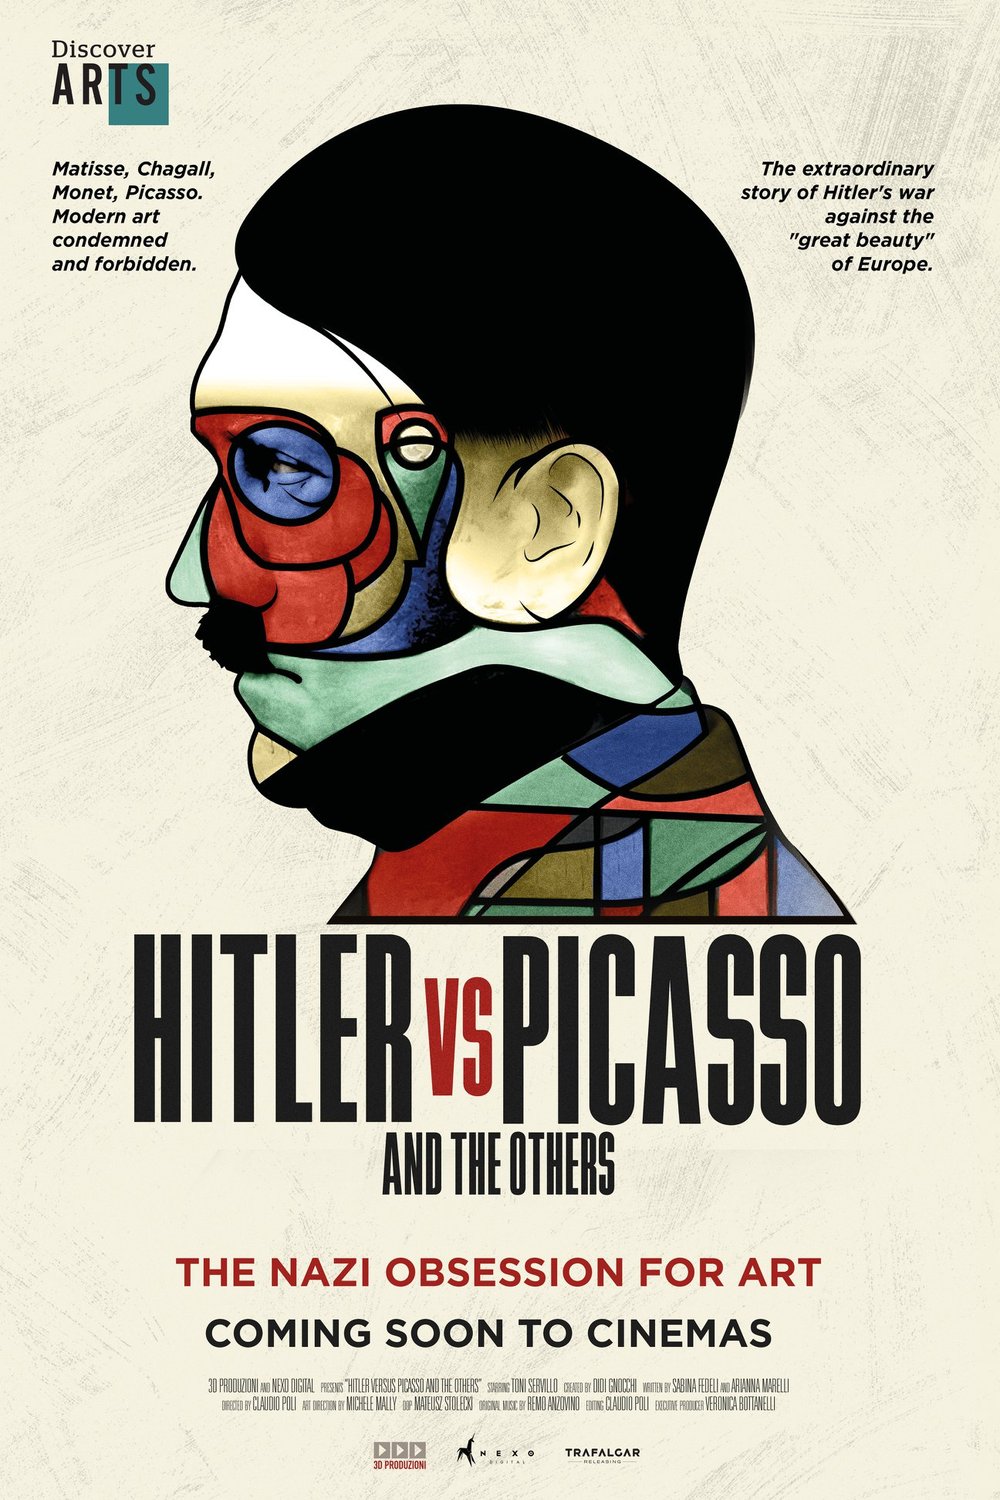 Poster of the movie Discover Arts: Hitler vs Picasso